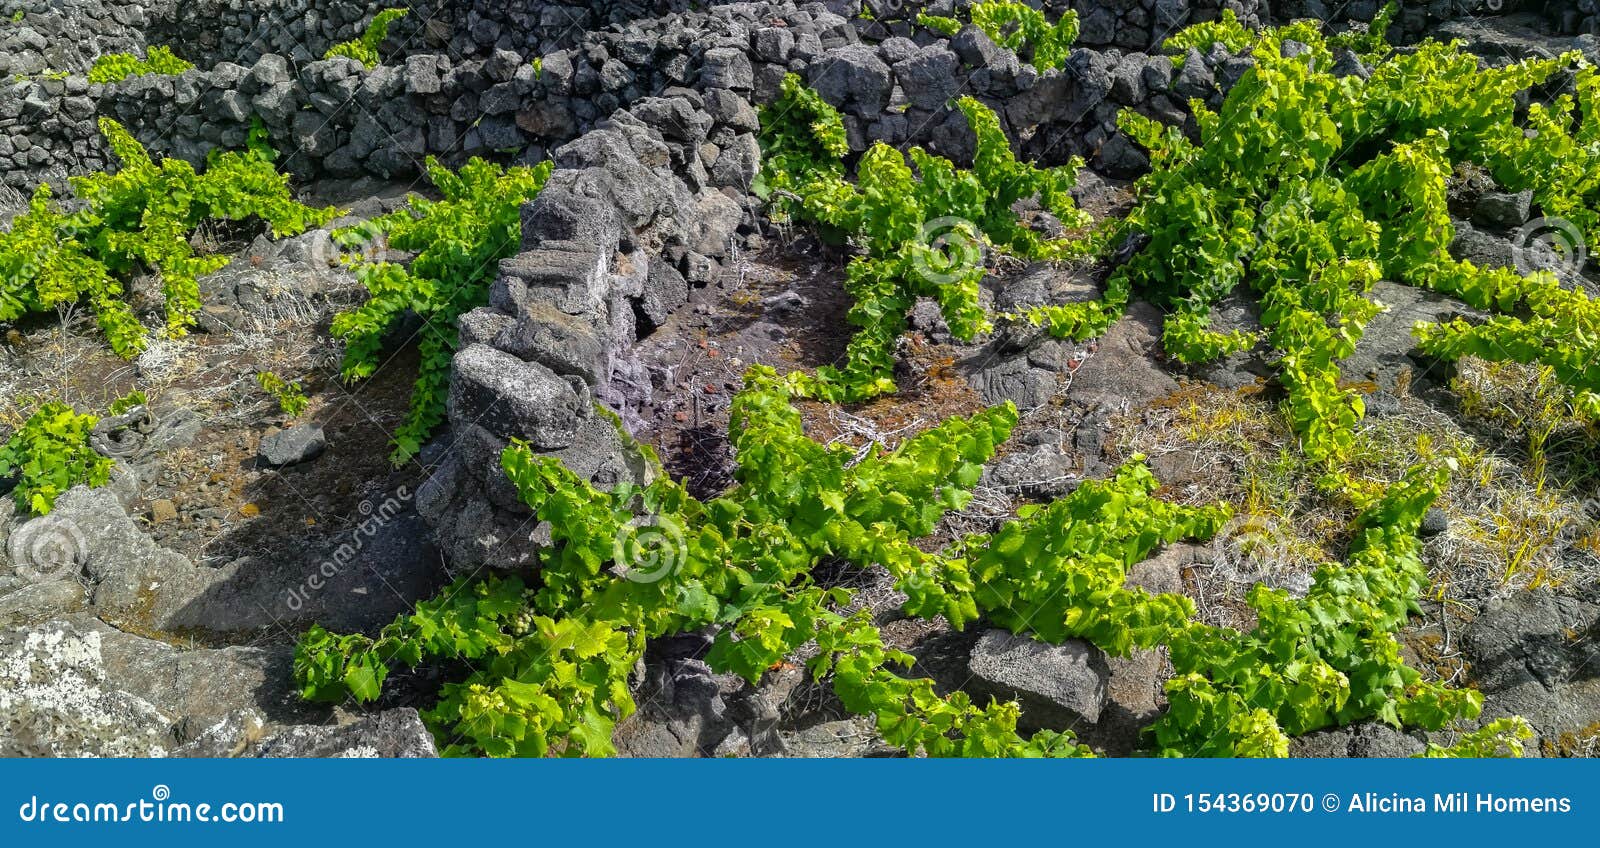 traditional vineyards in pico island, azores. the vineyards are among stone walls, called the `vineyard corrals`